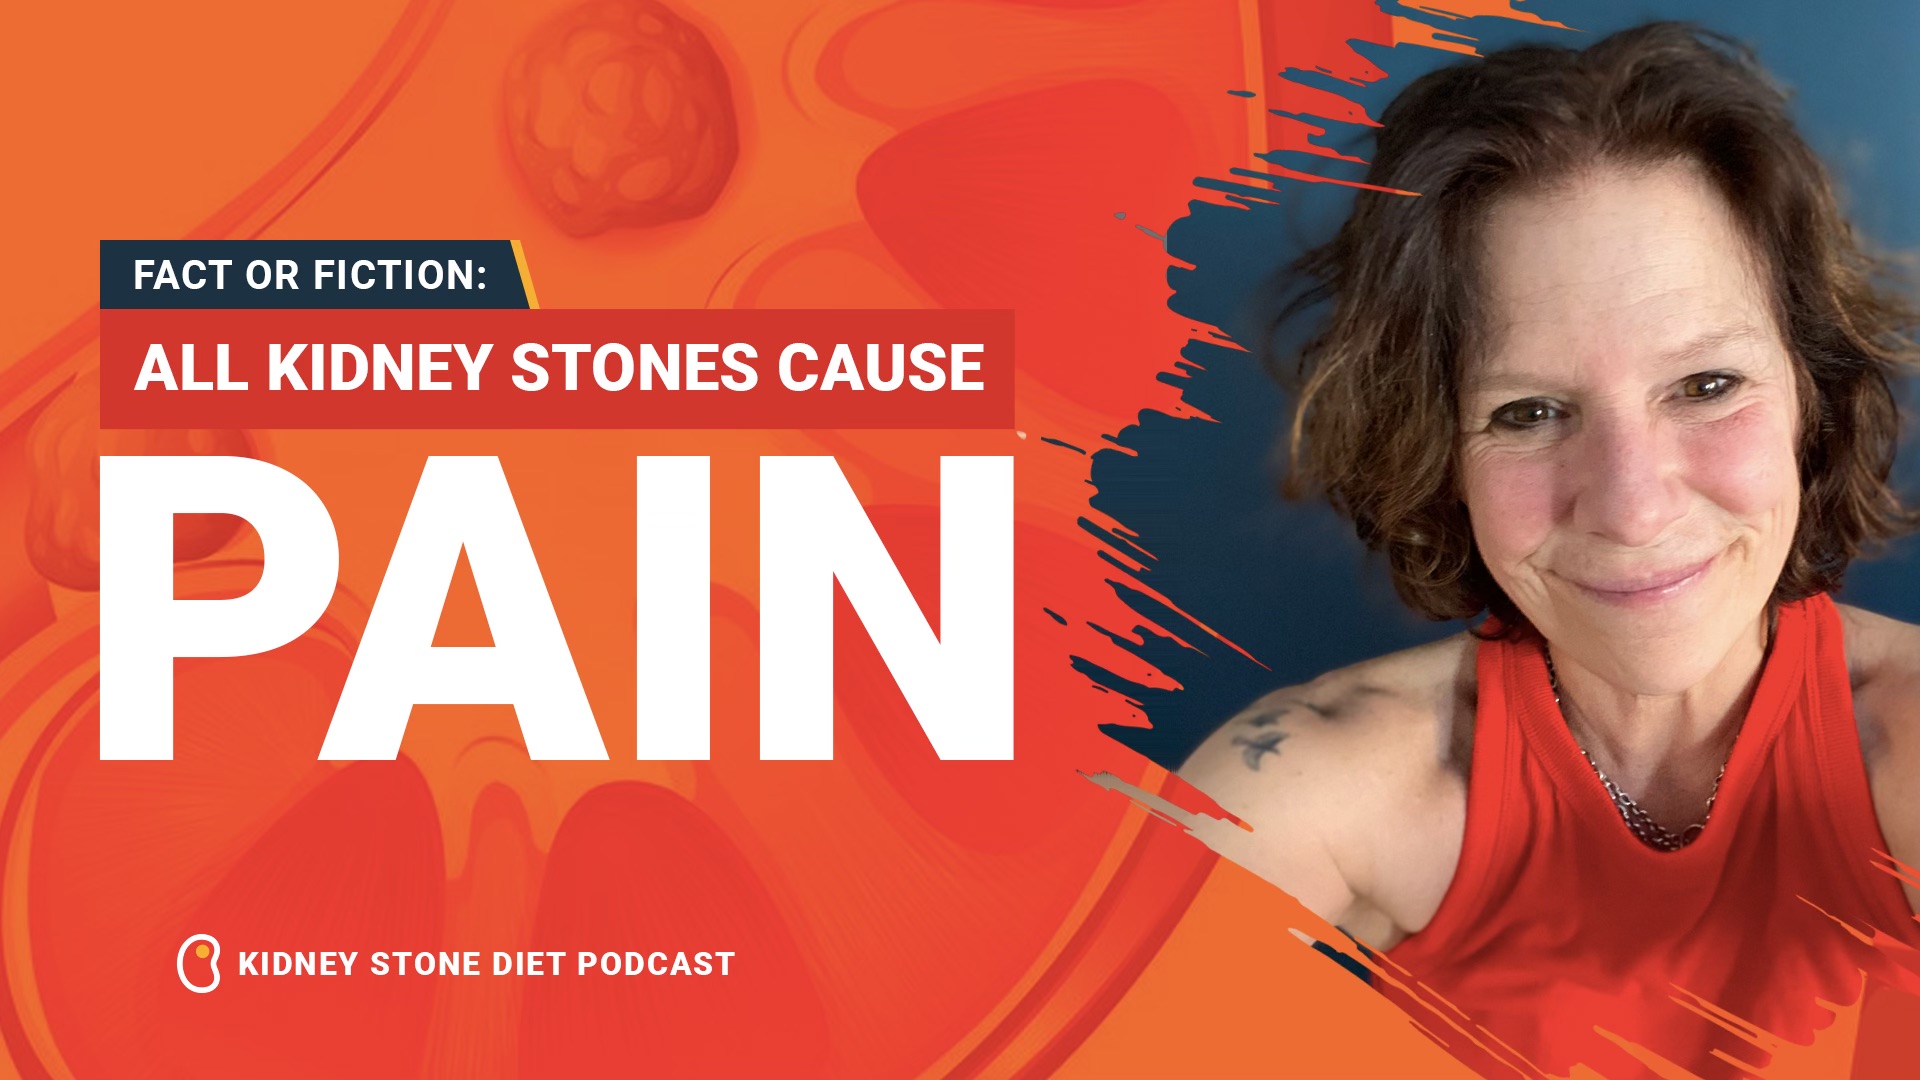 Fact or Fiction: All kidney stones cause pain